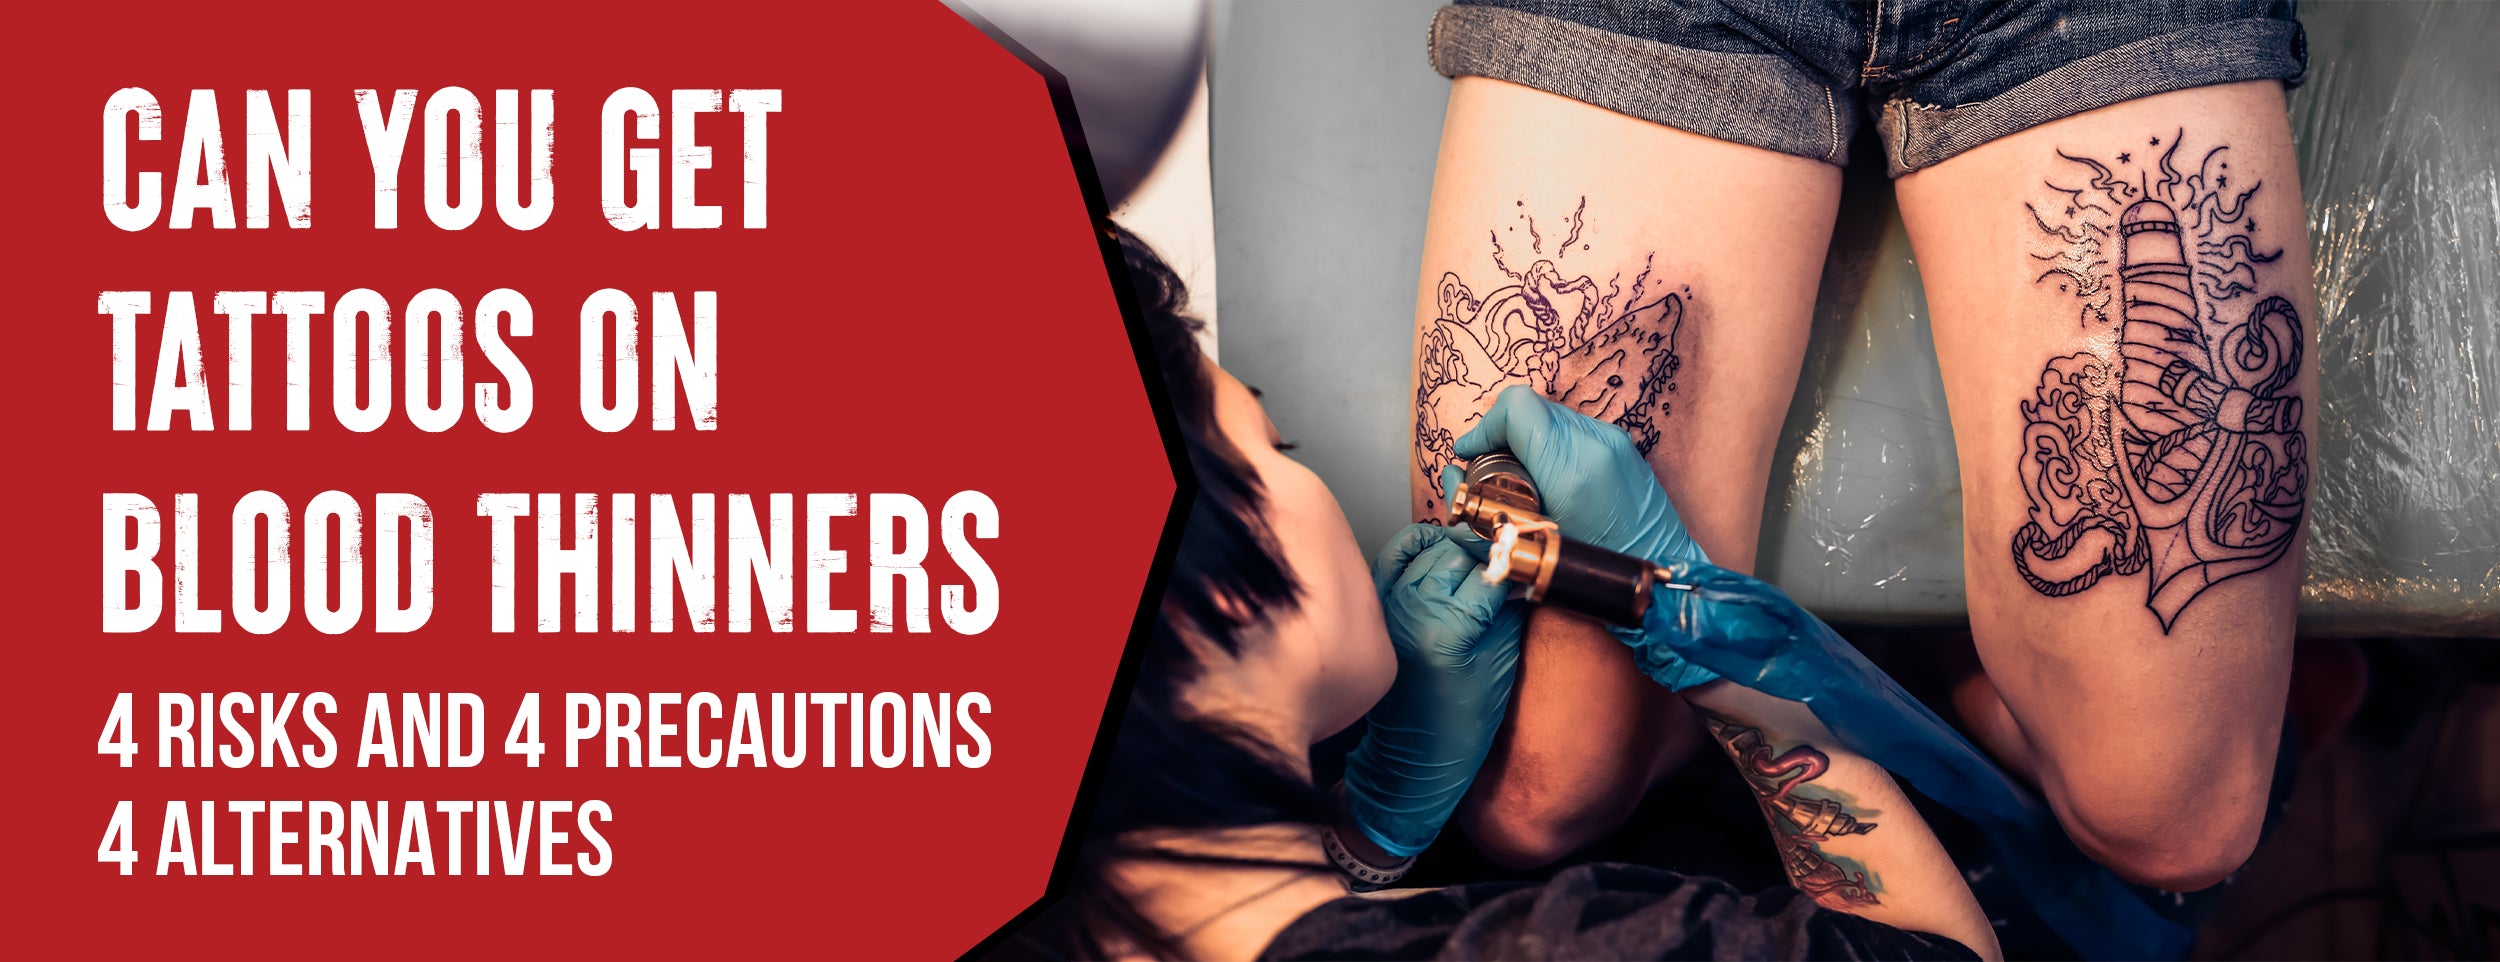 Tattoos on Blood Thinners: 4 Risks 4 Precautions [with 4 Alternatives]